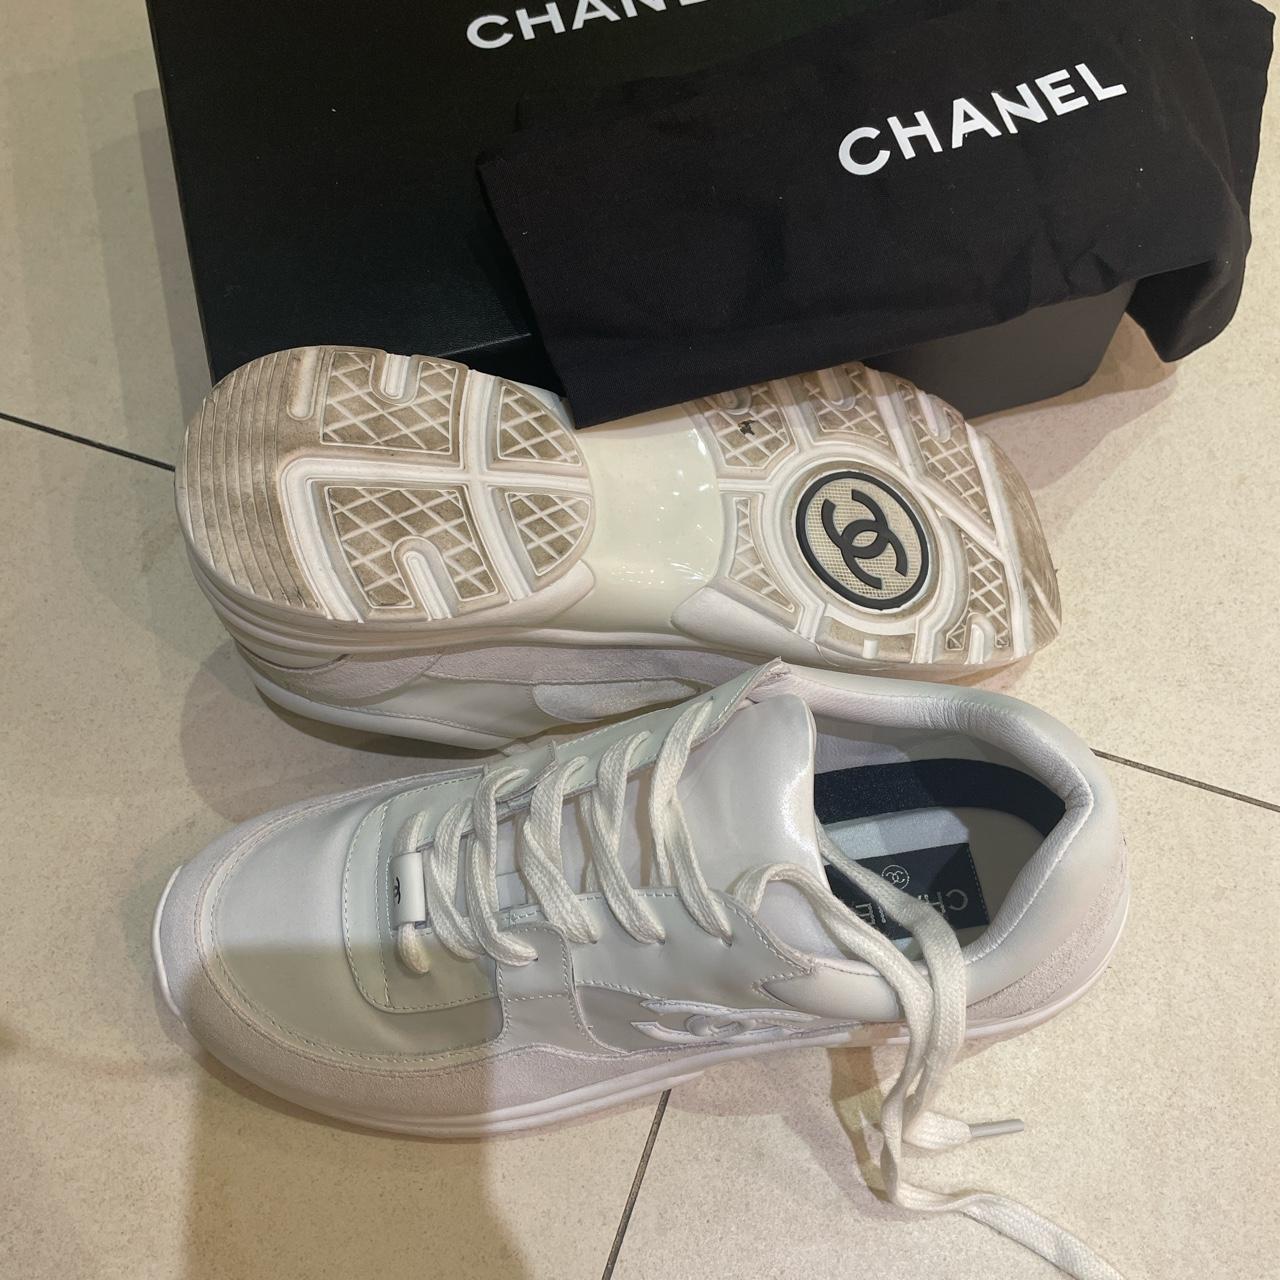 Chanel white trainers - worn once - size 42 ladies... - Depop